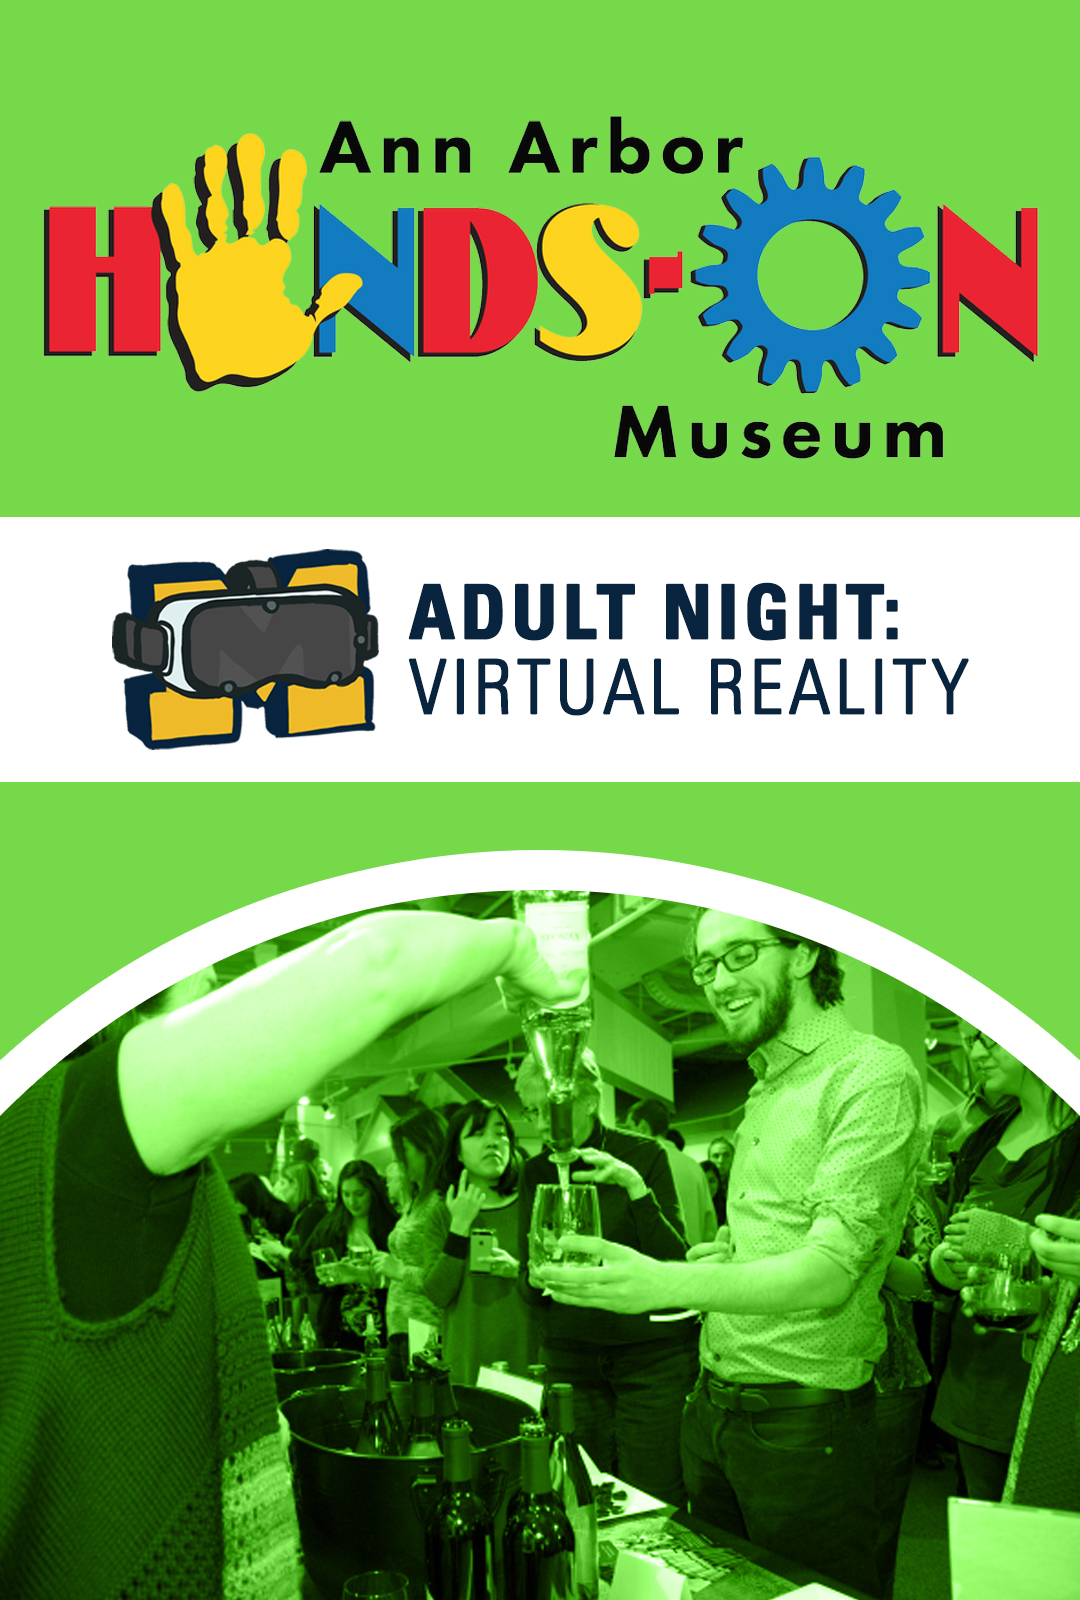 Ann Arbor Hands on Museum - Hands-On After Hours: Virtual Reality 